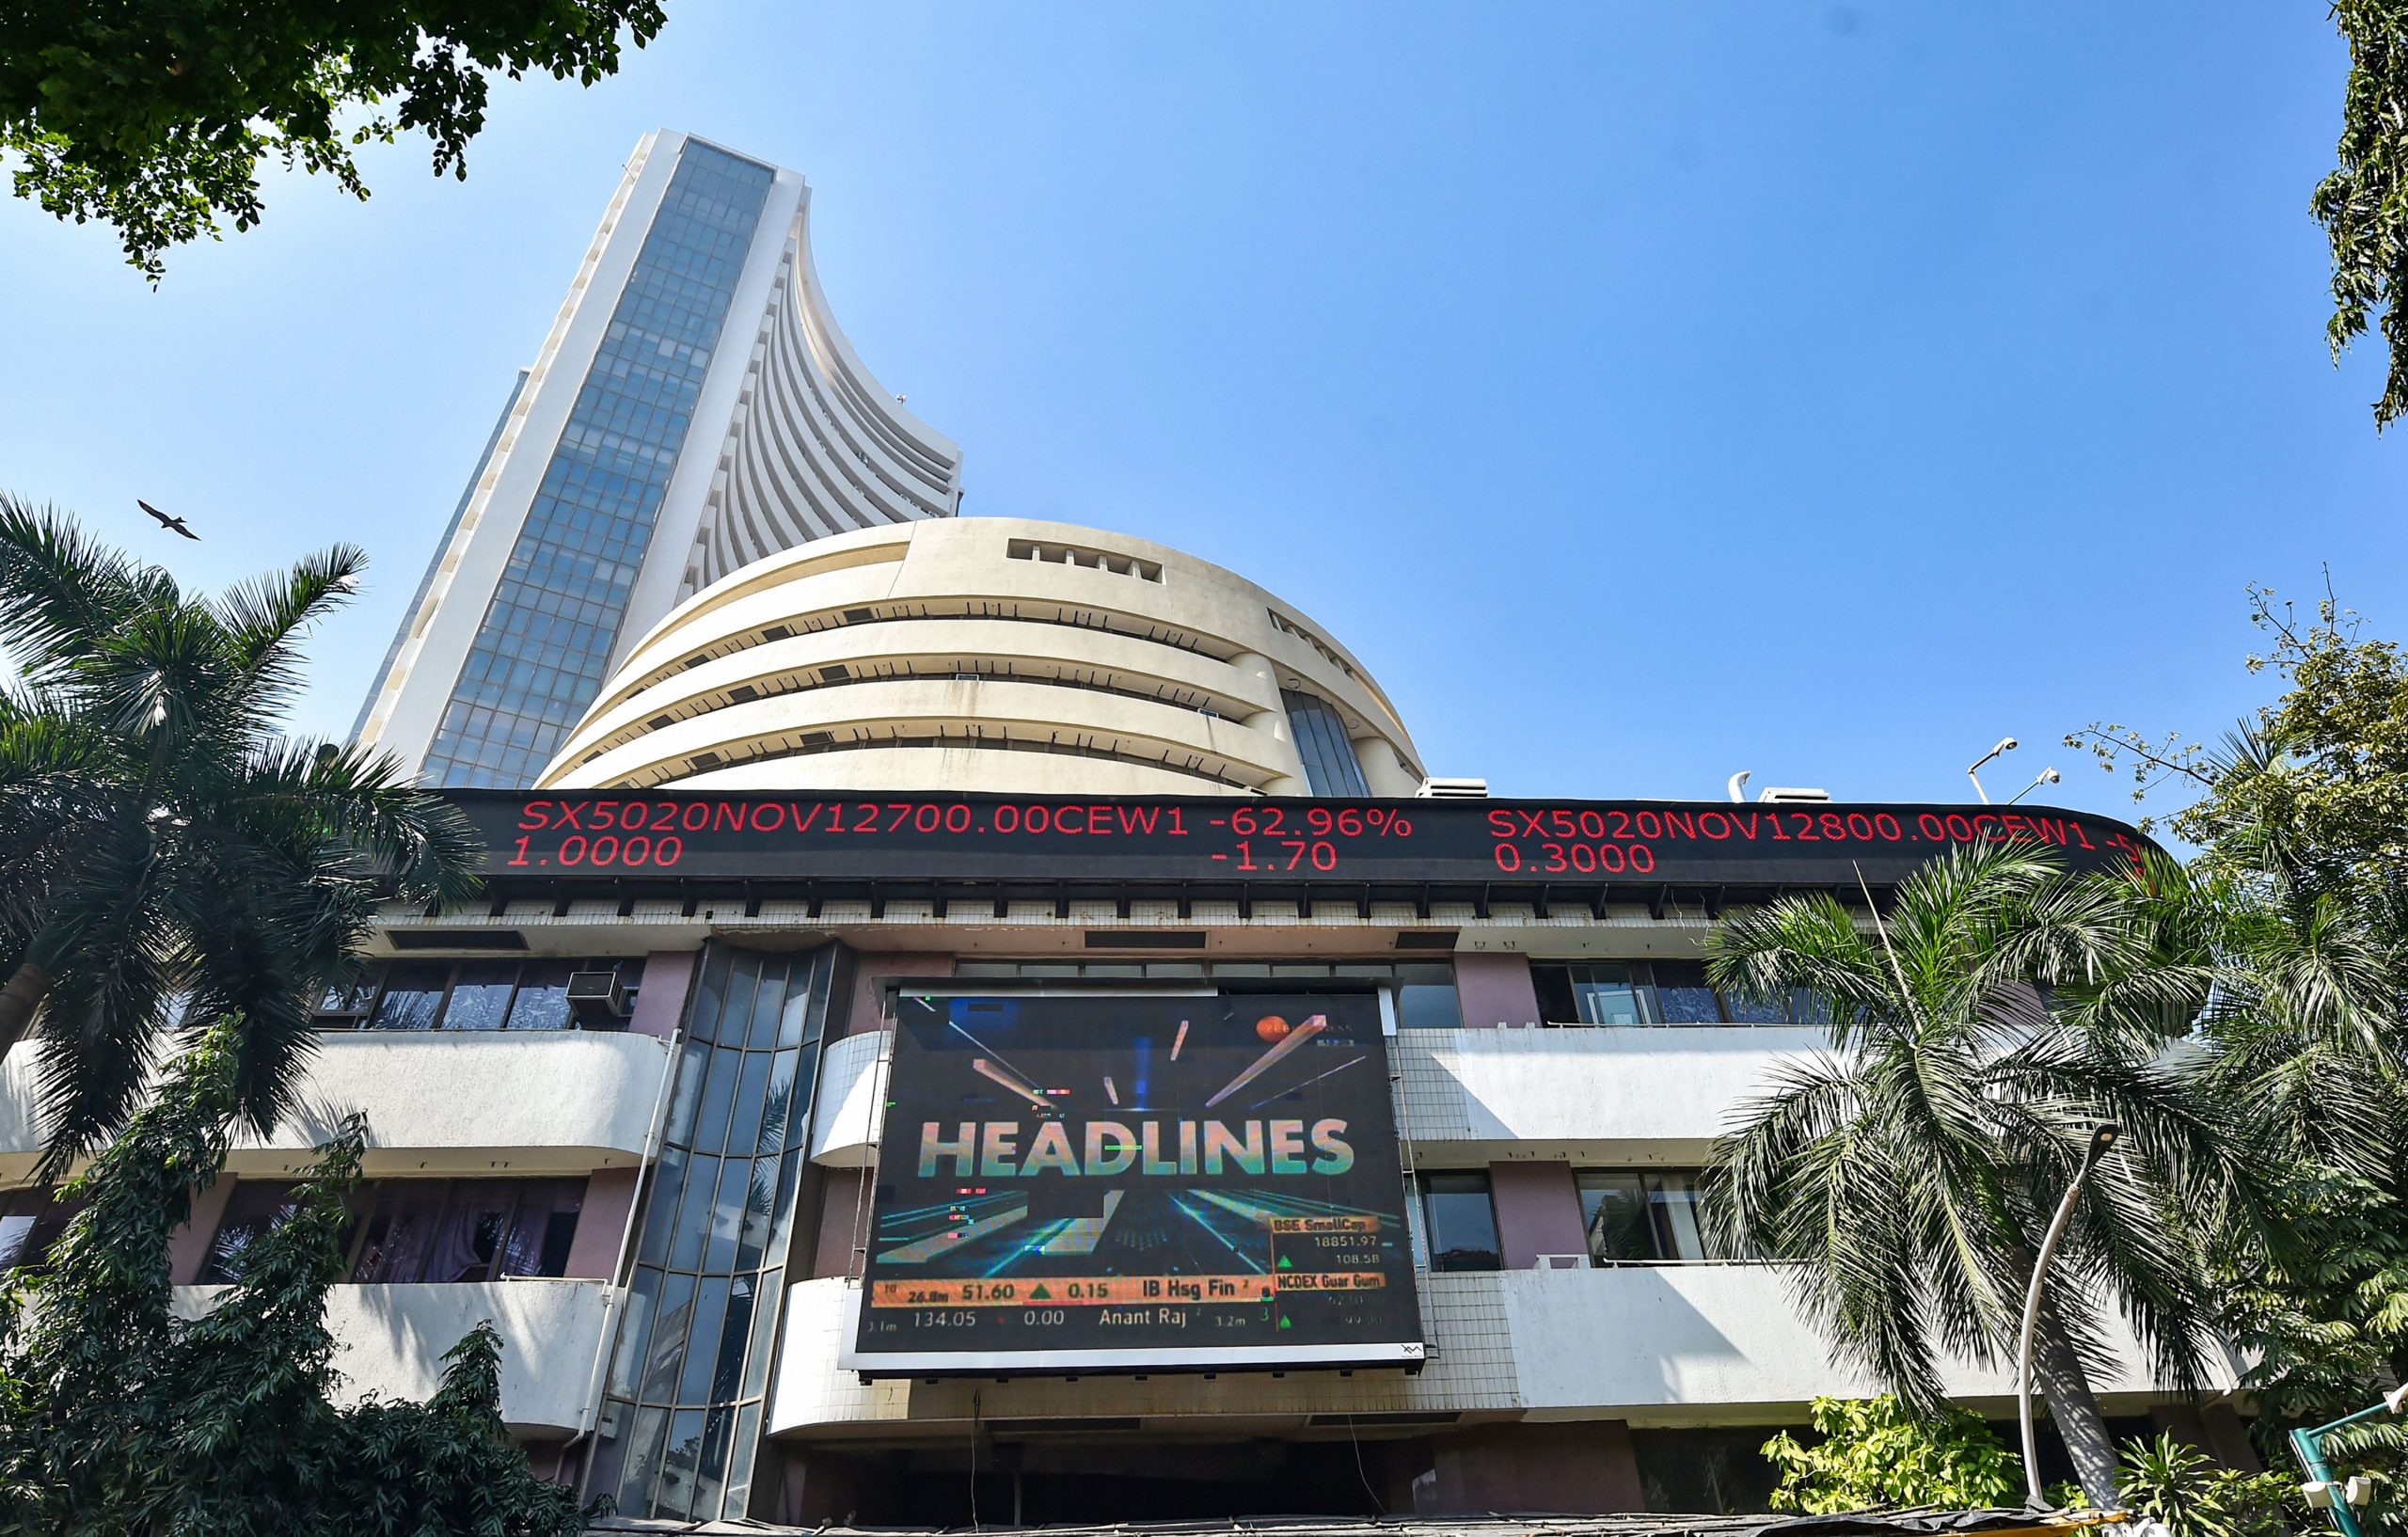 Trending Stocks: Tata Motors, NTPC, SpiceJet and others in news today